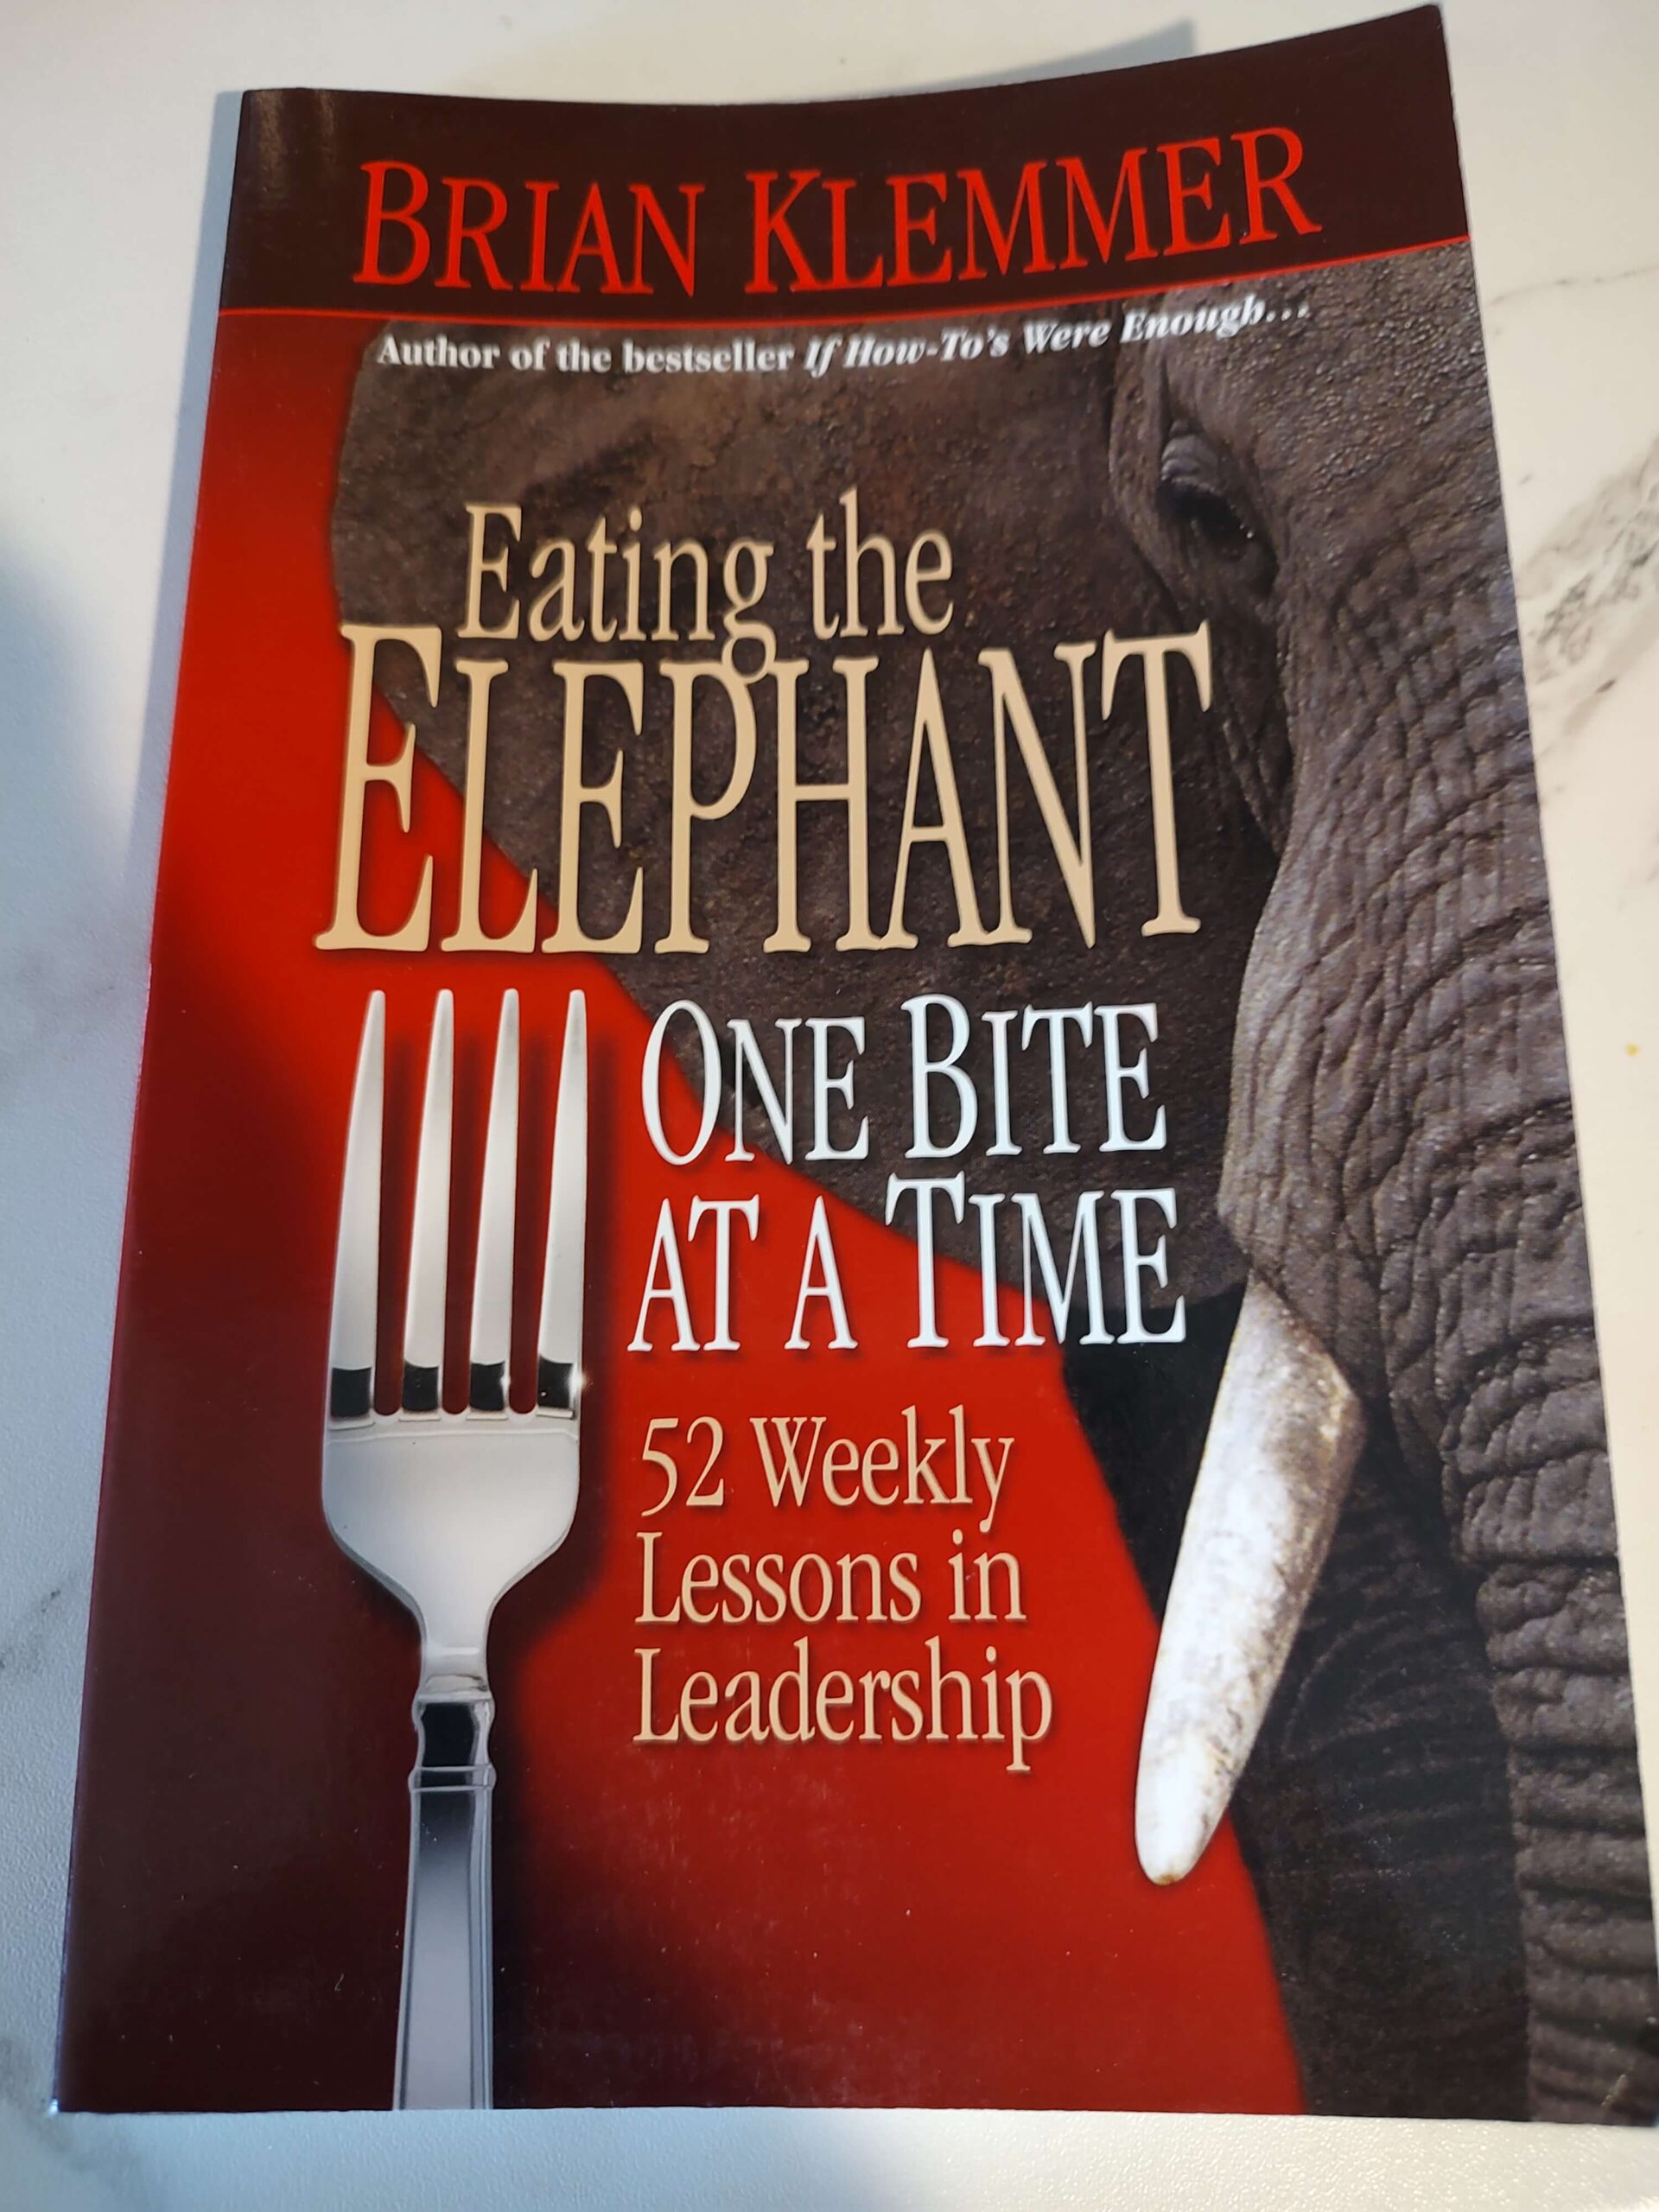 The Book Eating the Elephant One Bite at a Time